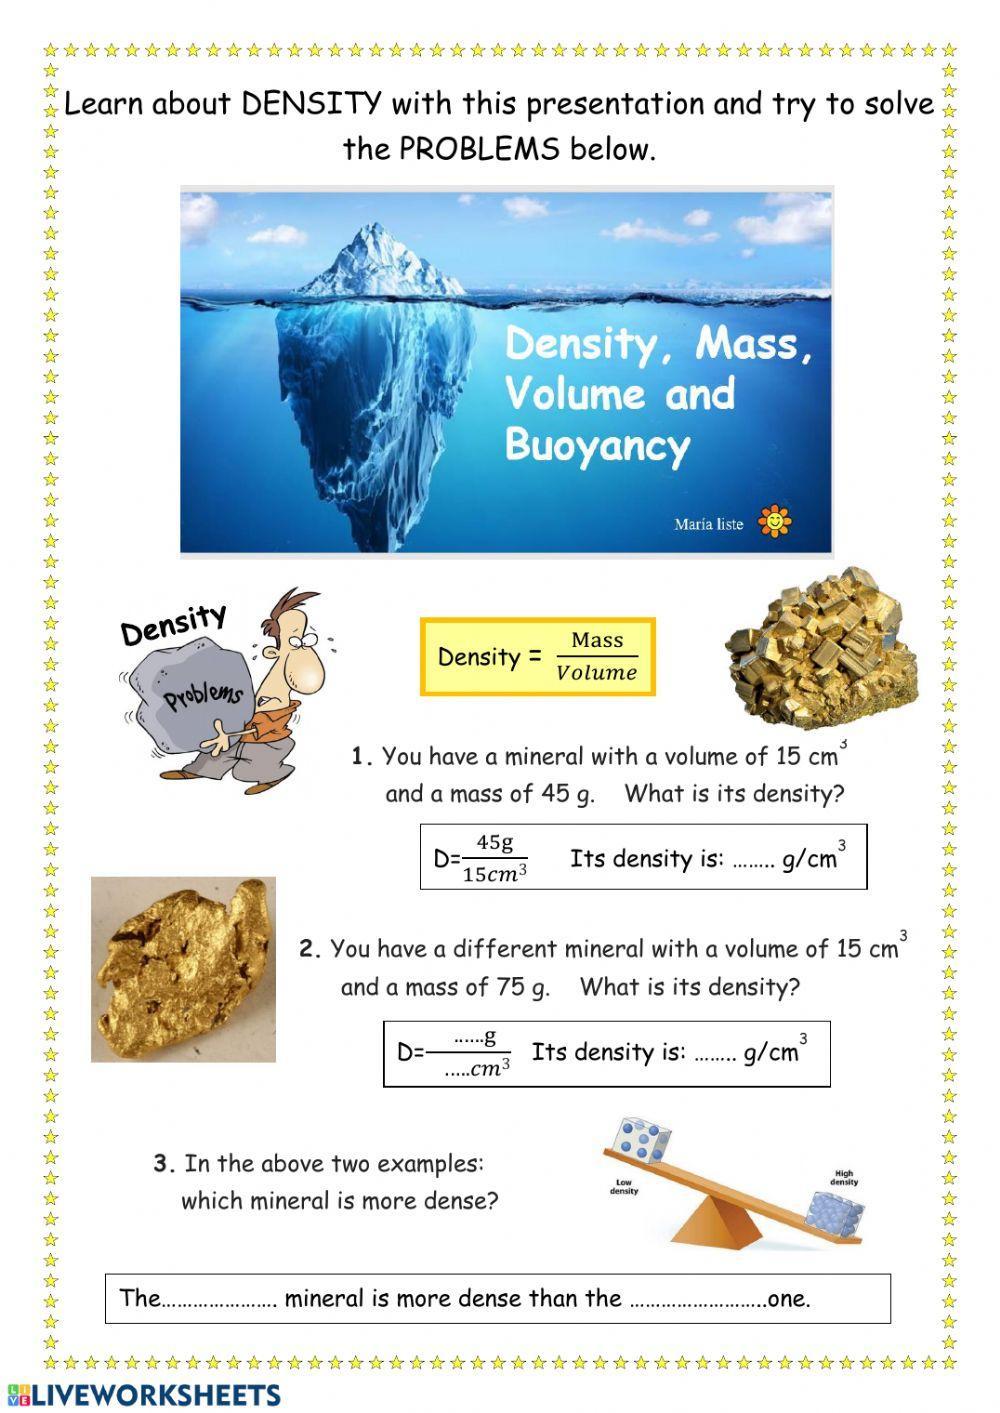 Density. Power Point and Problems